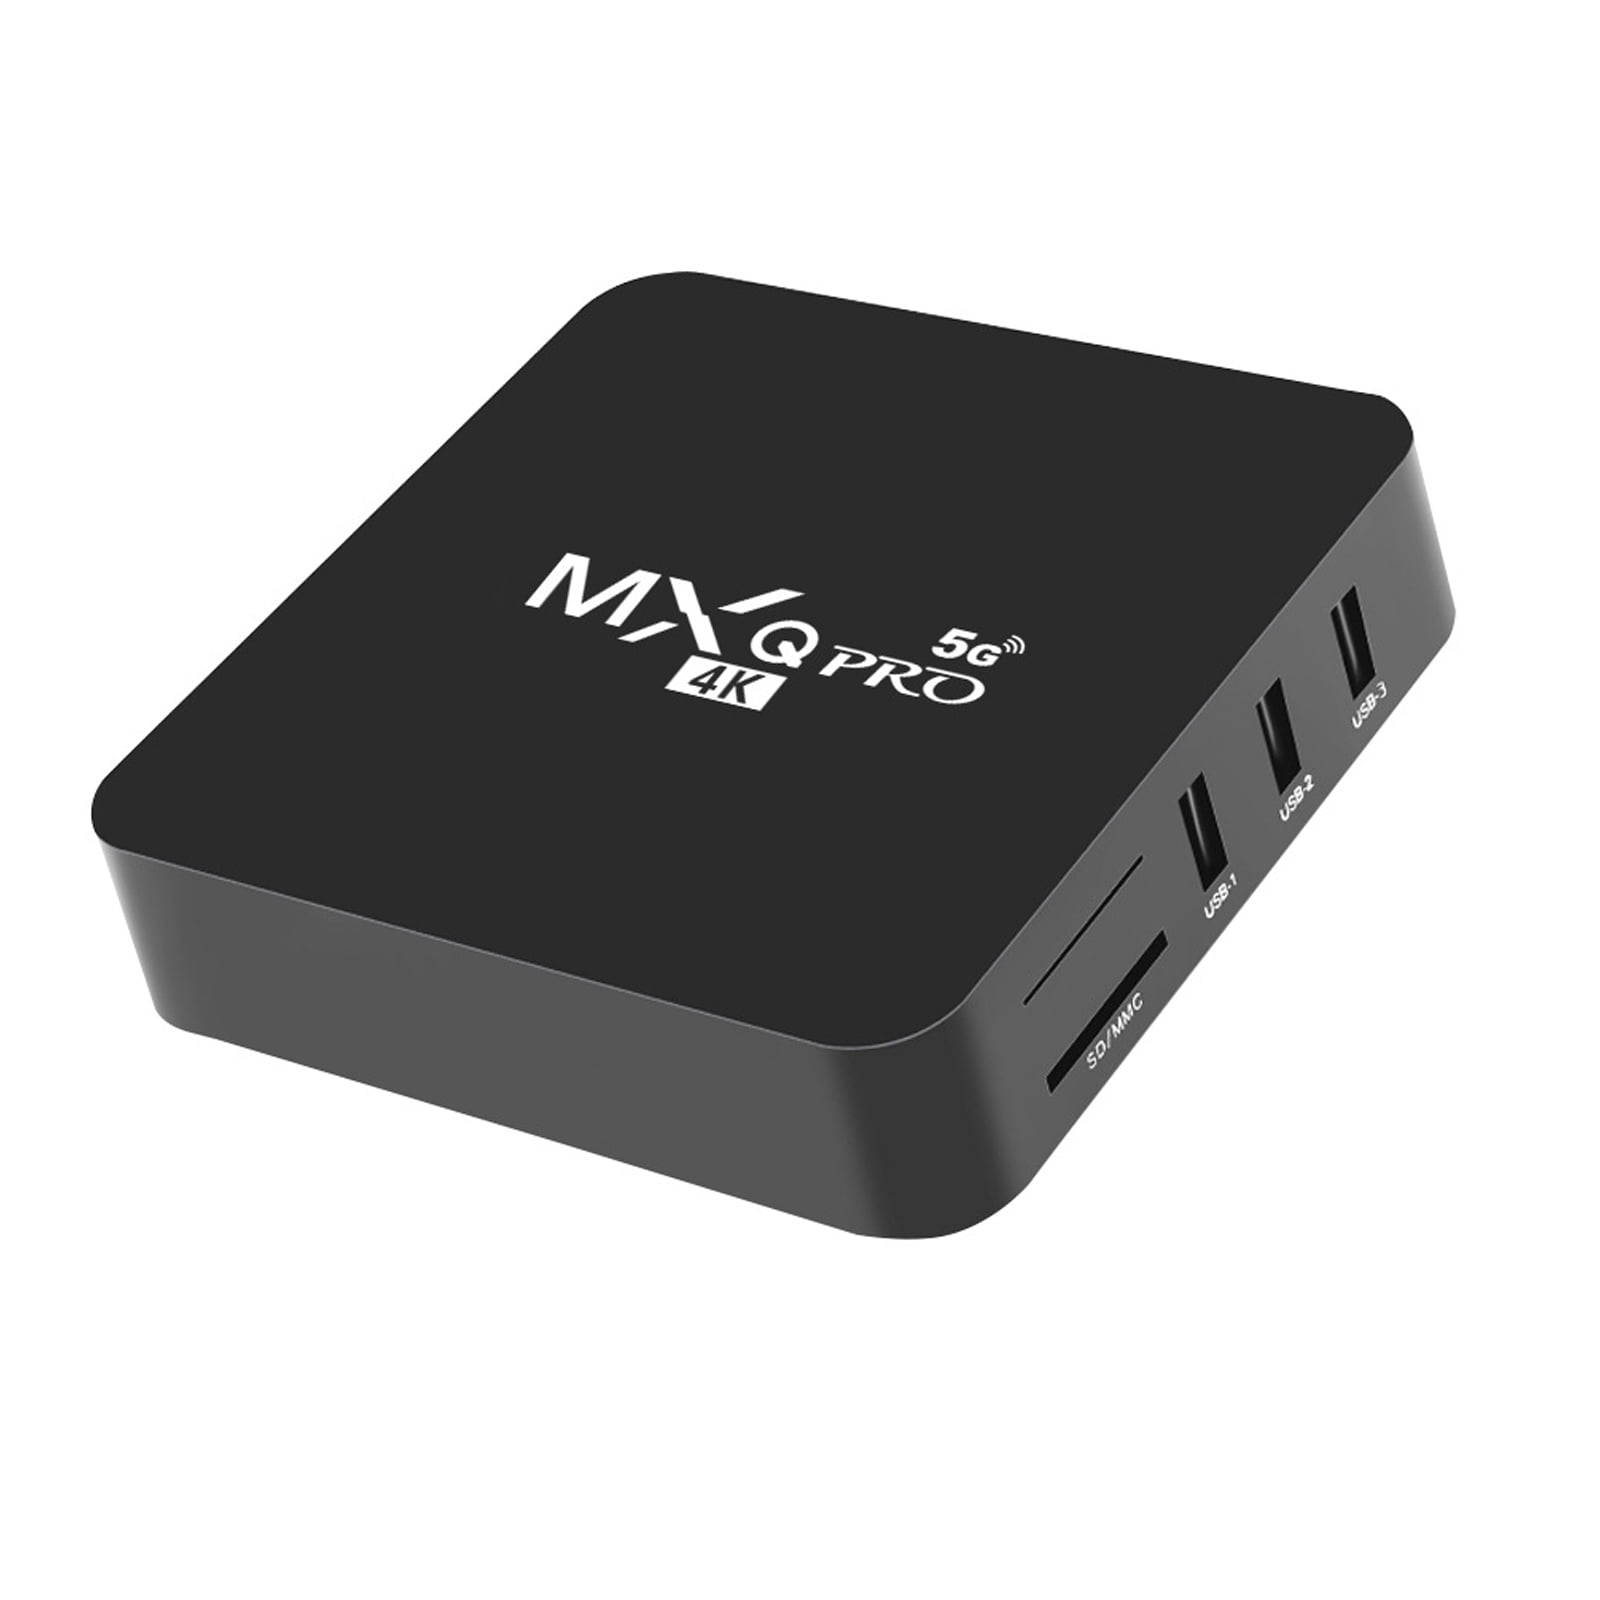 Mxq Pro 4k Android TV Box 2gb 16gb, Model Name/Number: New Model